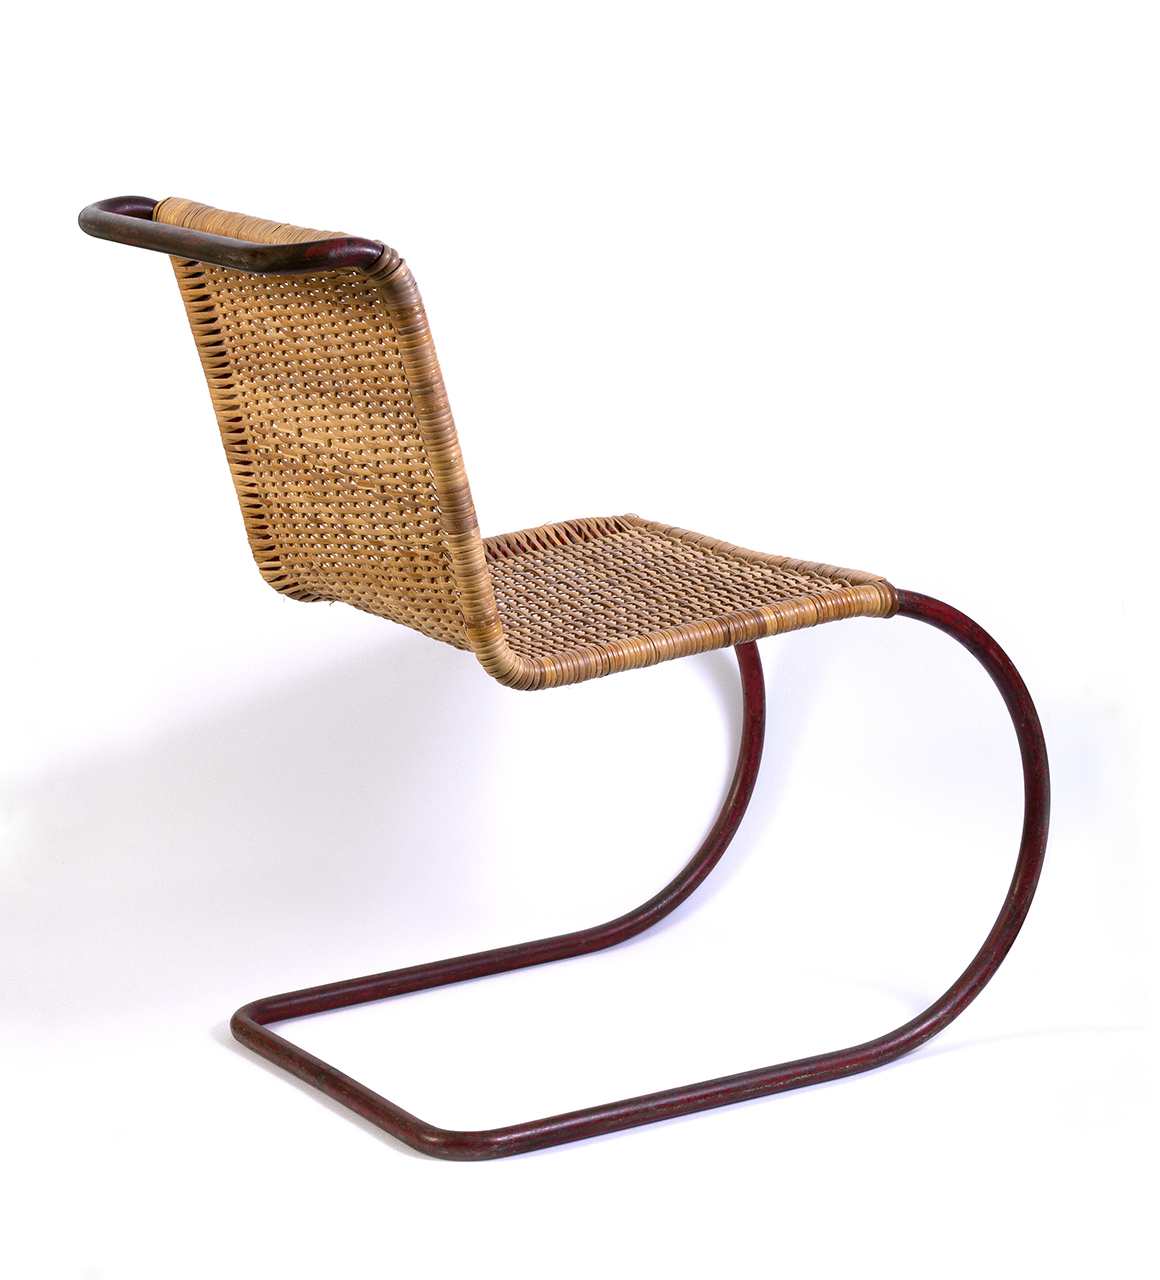 An armless chair with a wicker with the back and seat in one continues weave. The chair is supported by a tube base rather than conventional legs. 